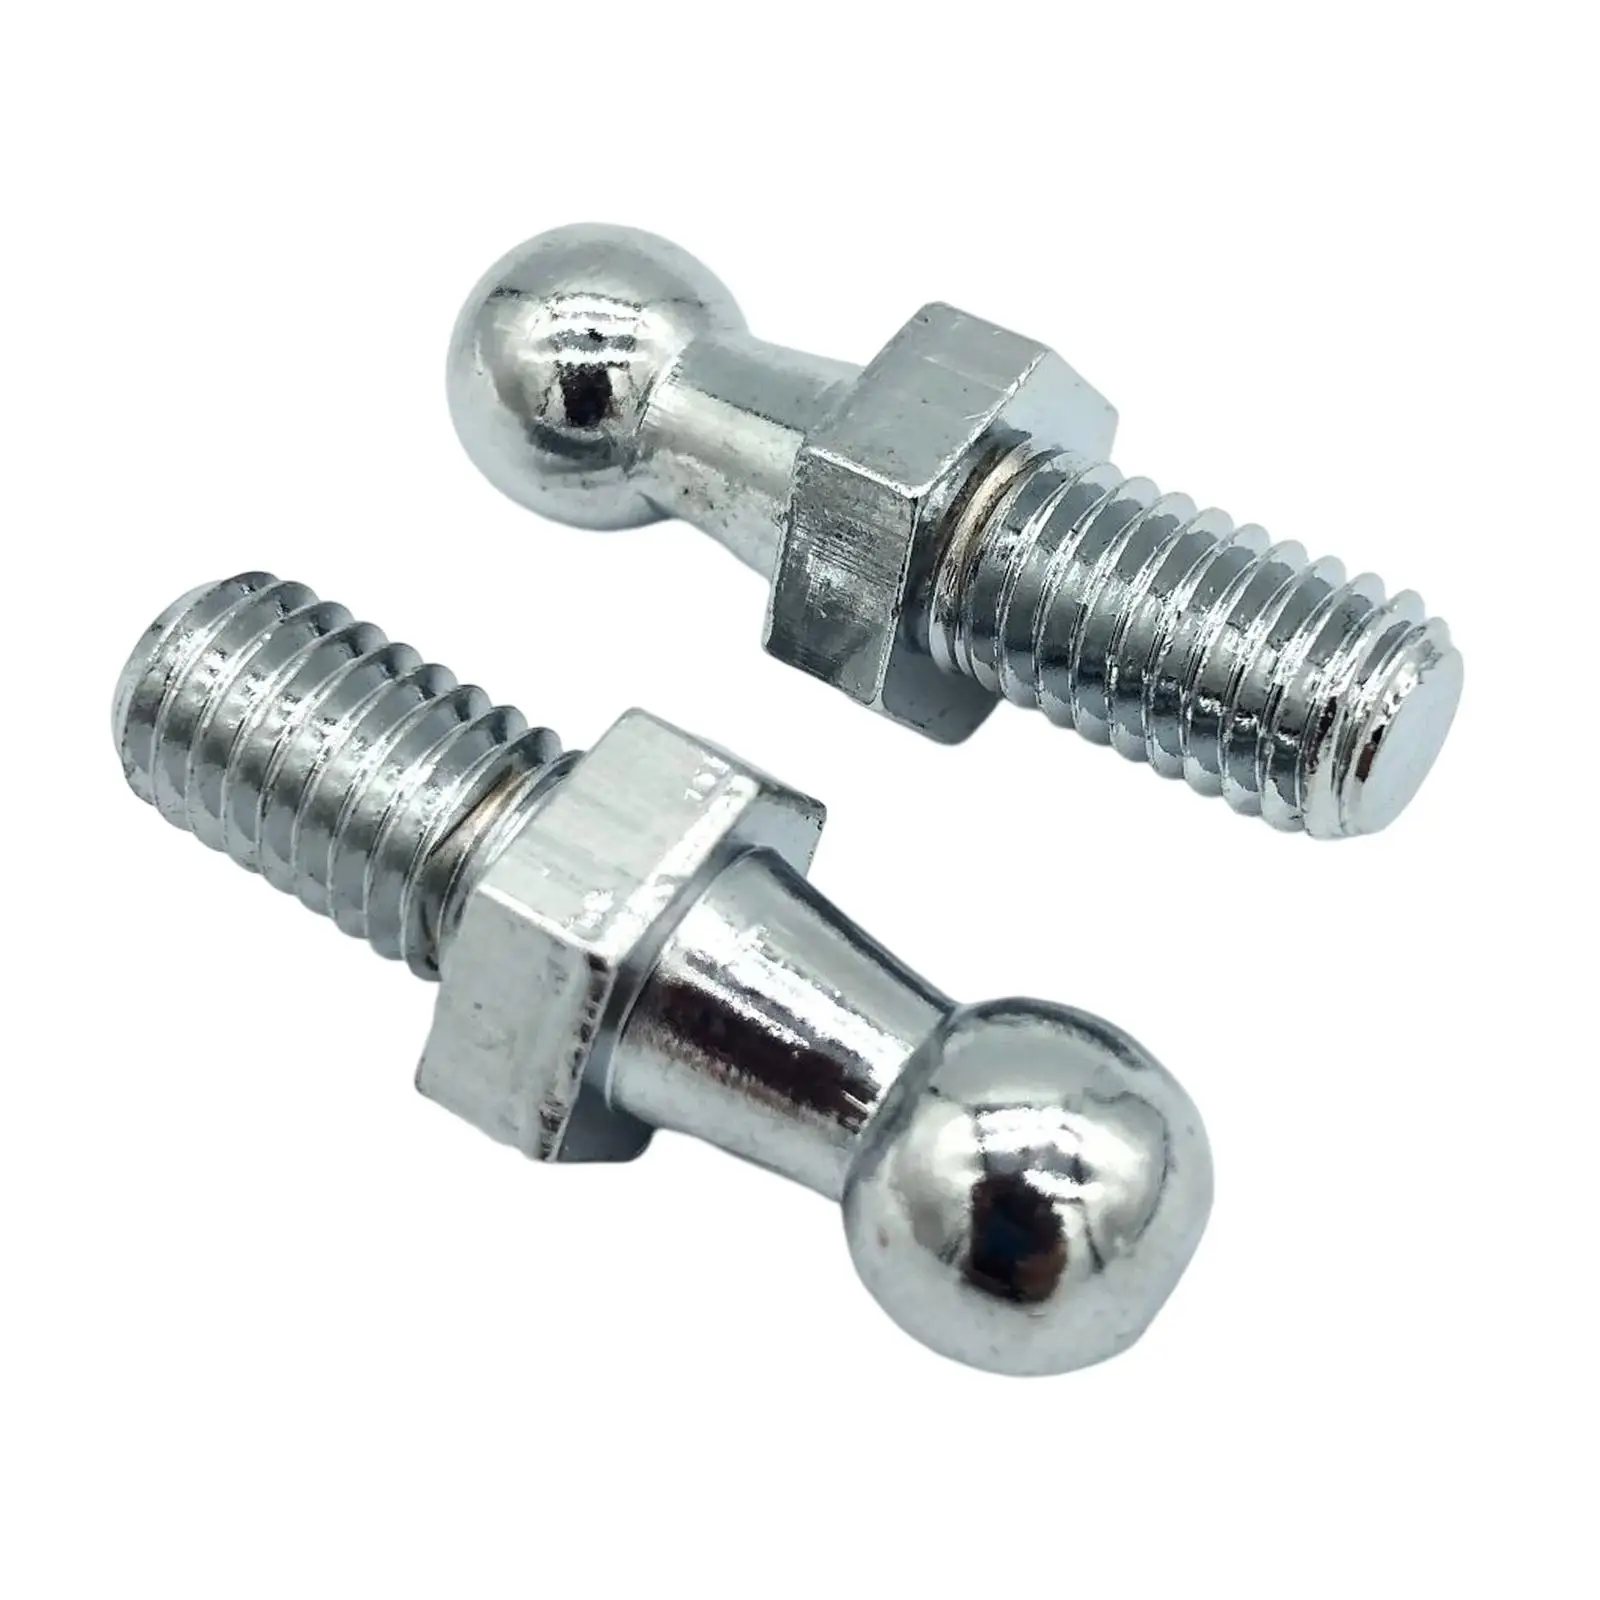 2x Ball Stud Pin Bolt ,Replaces Easy to Install Accessory, Gas Strut End Fittings, 10mm Durable M8 M6 Universal